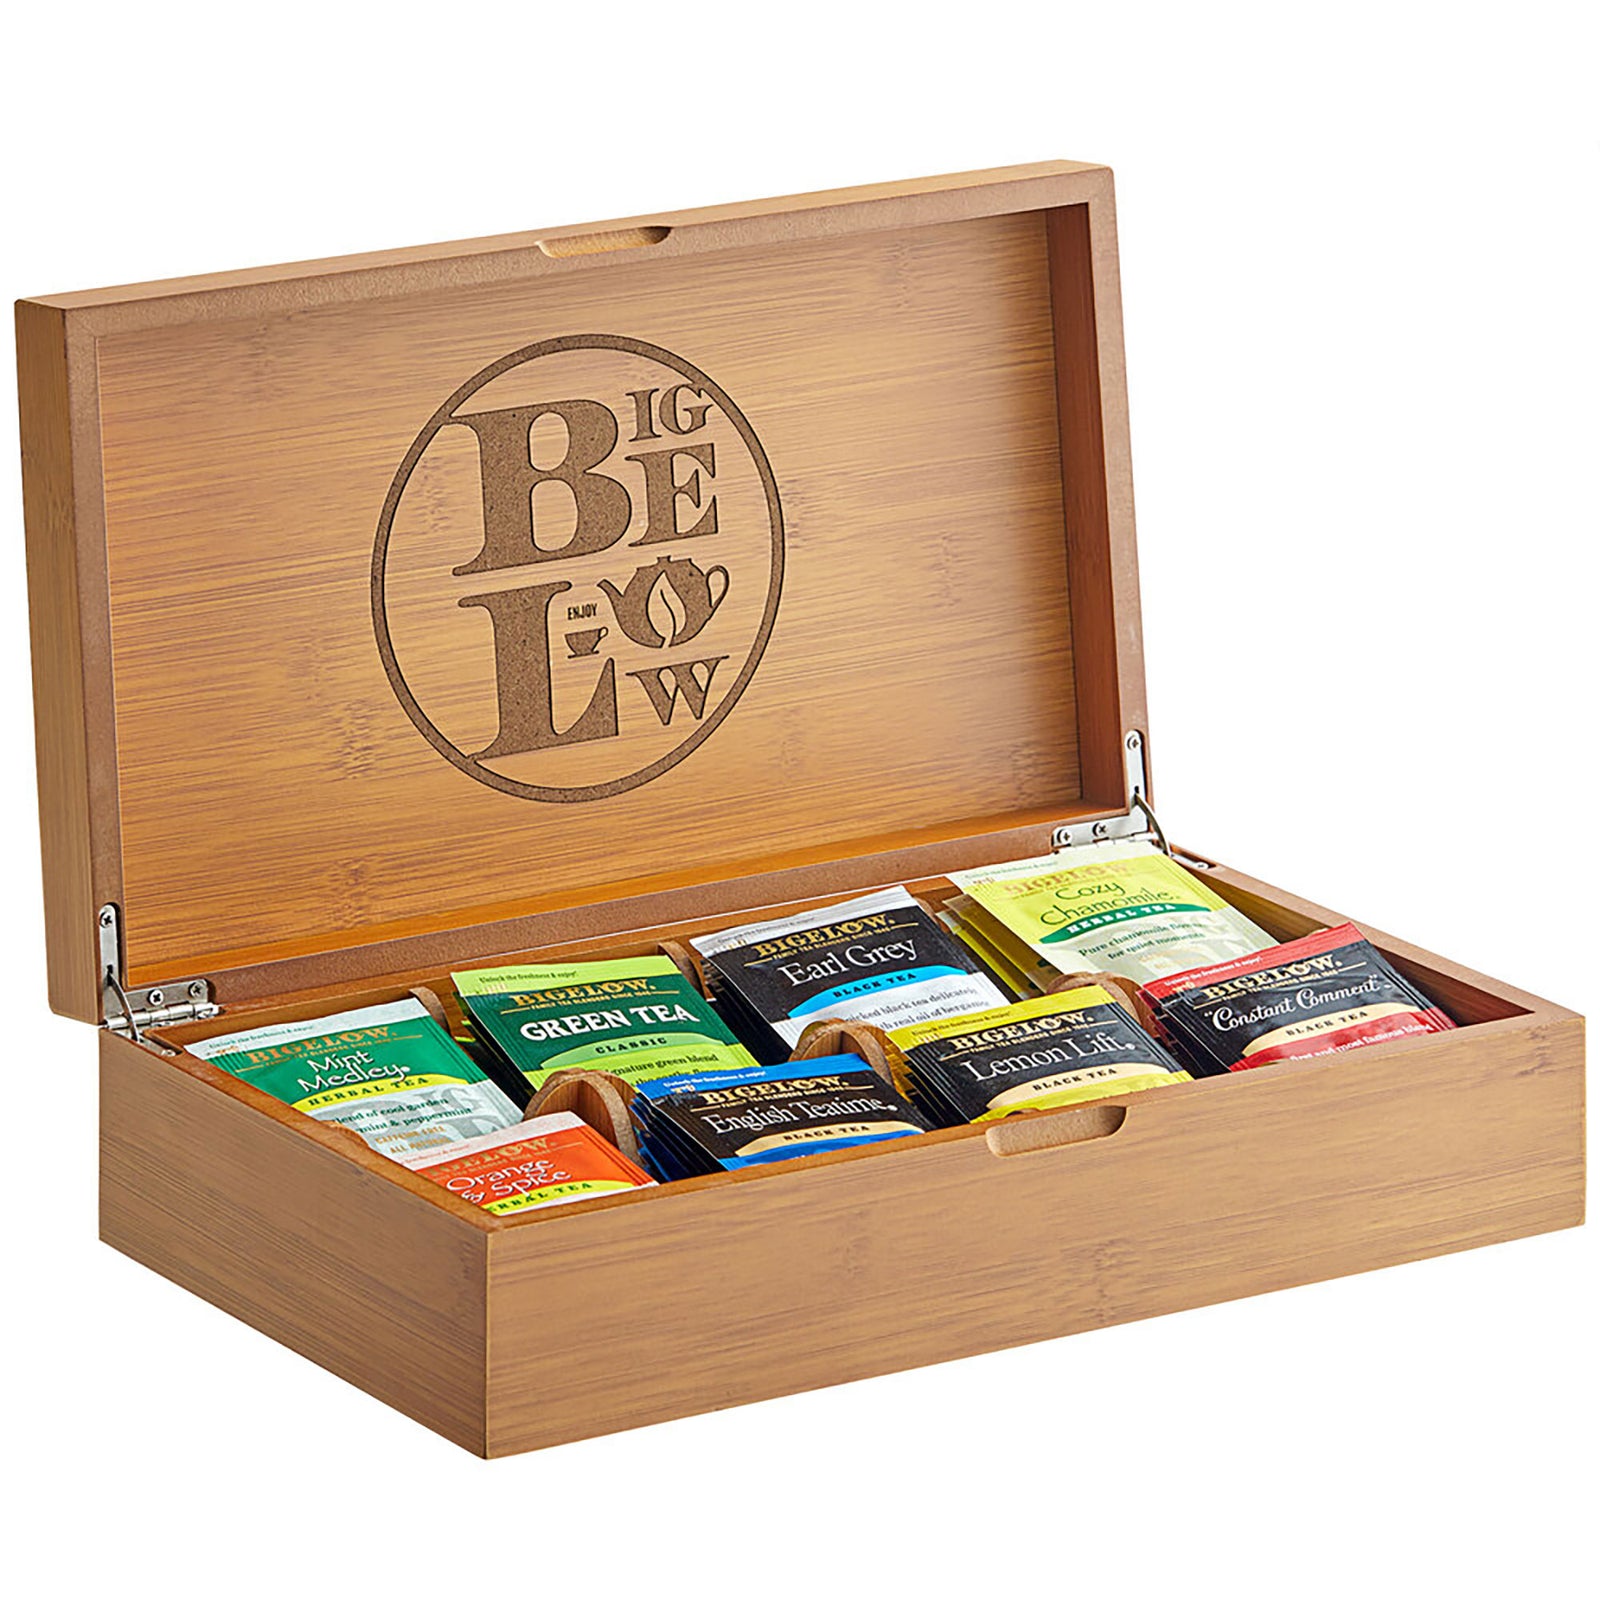 Engraved Tea Box Gift Set: The Perfect Blend of Elegance and Thoughtfulness